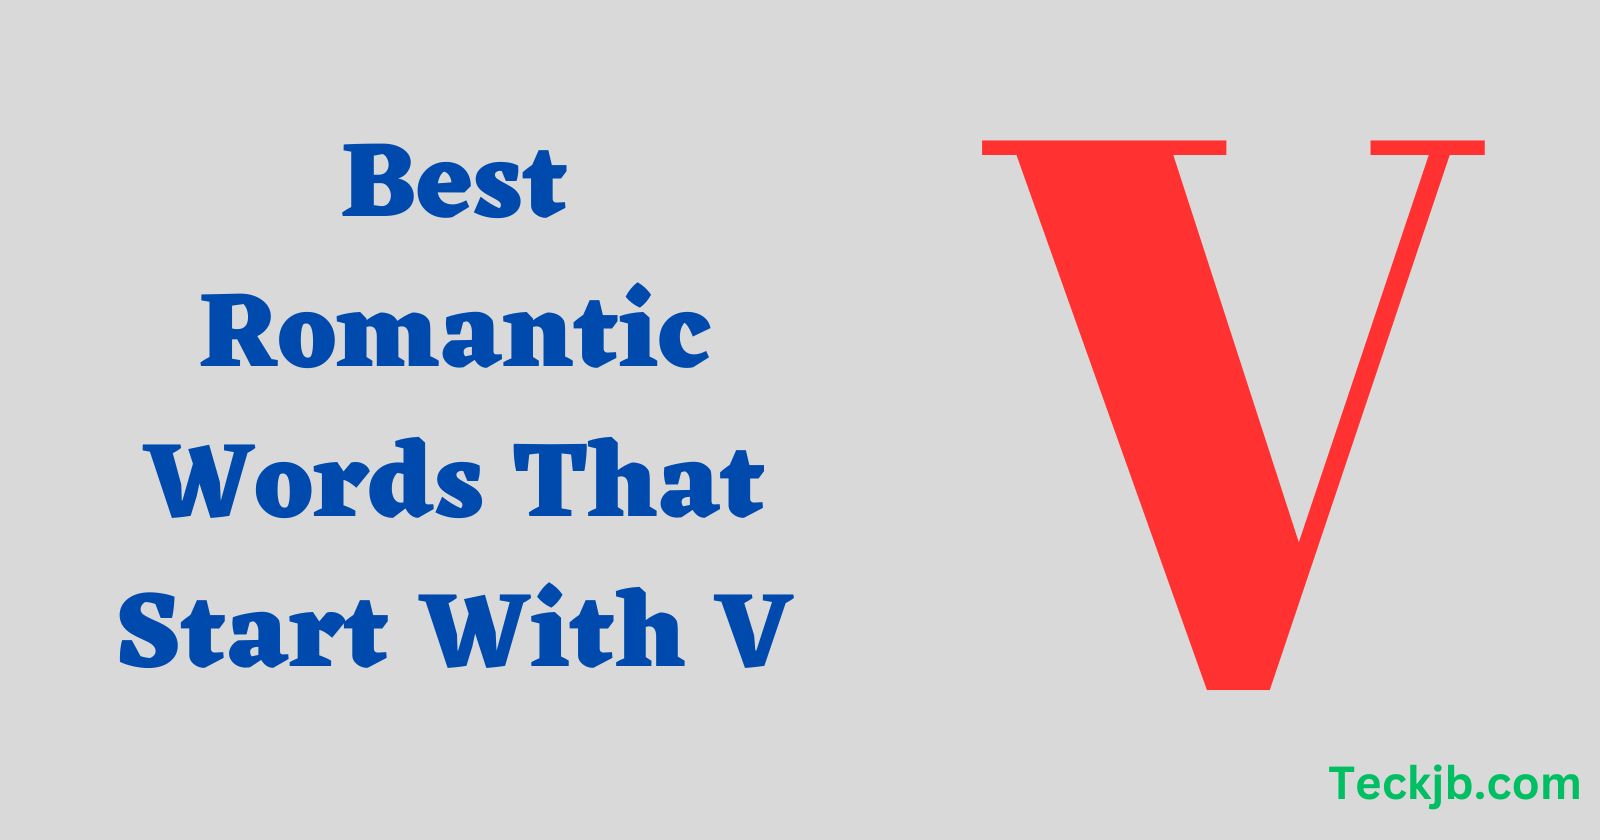 Romantic Words That Start With V